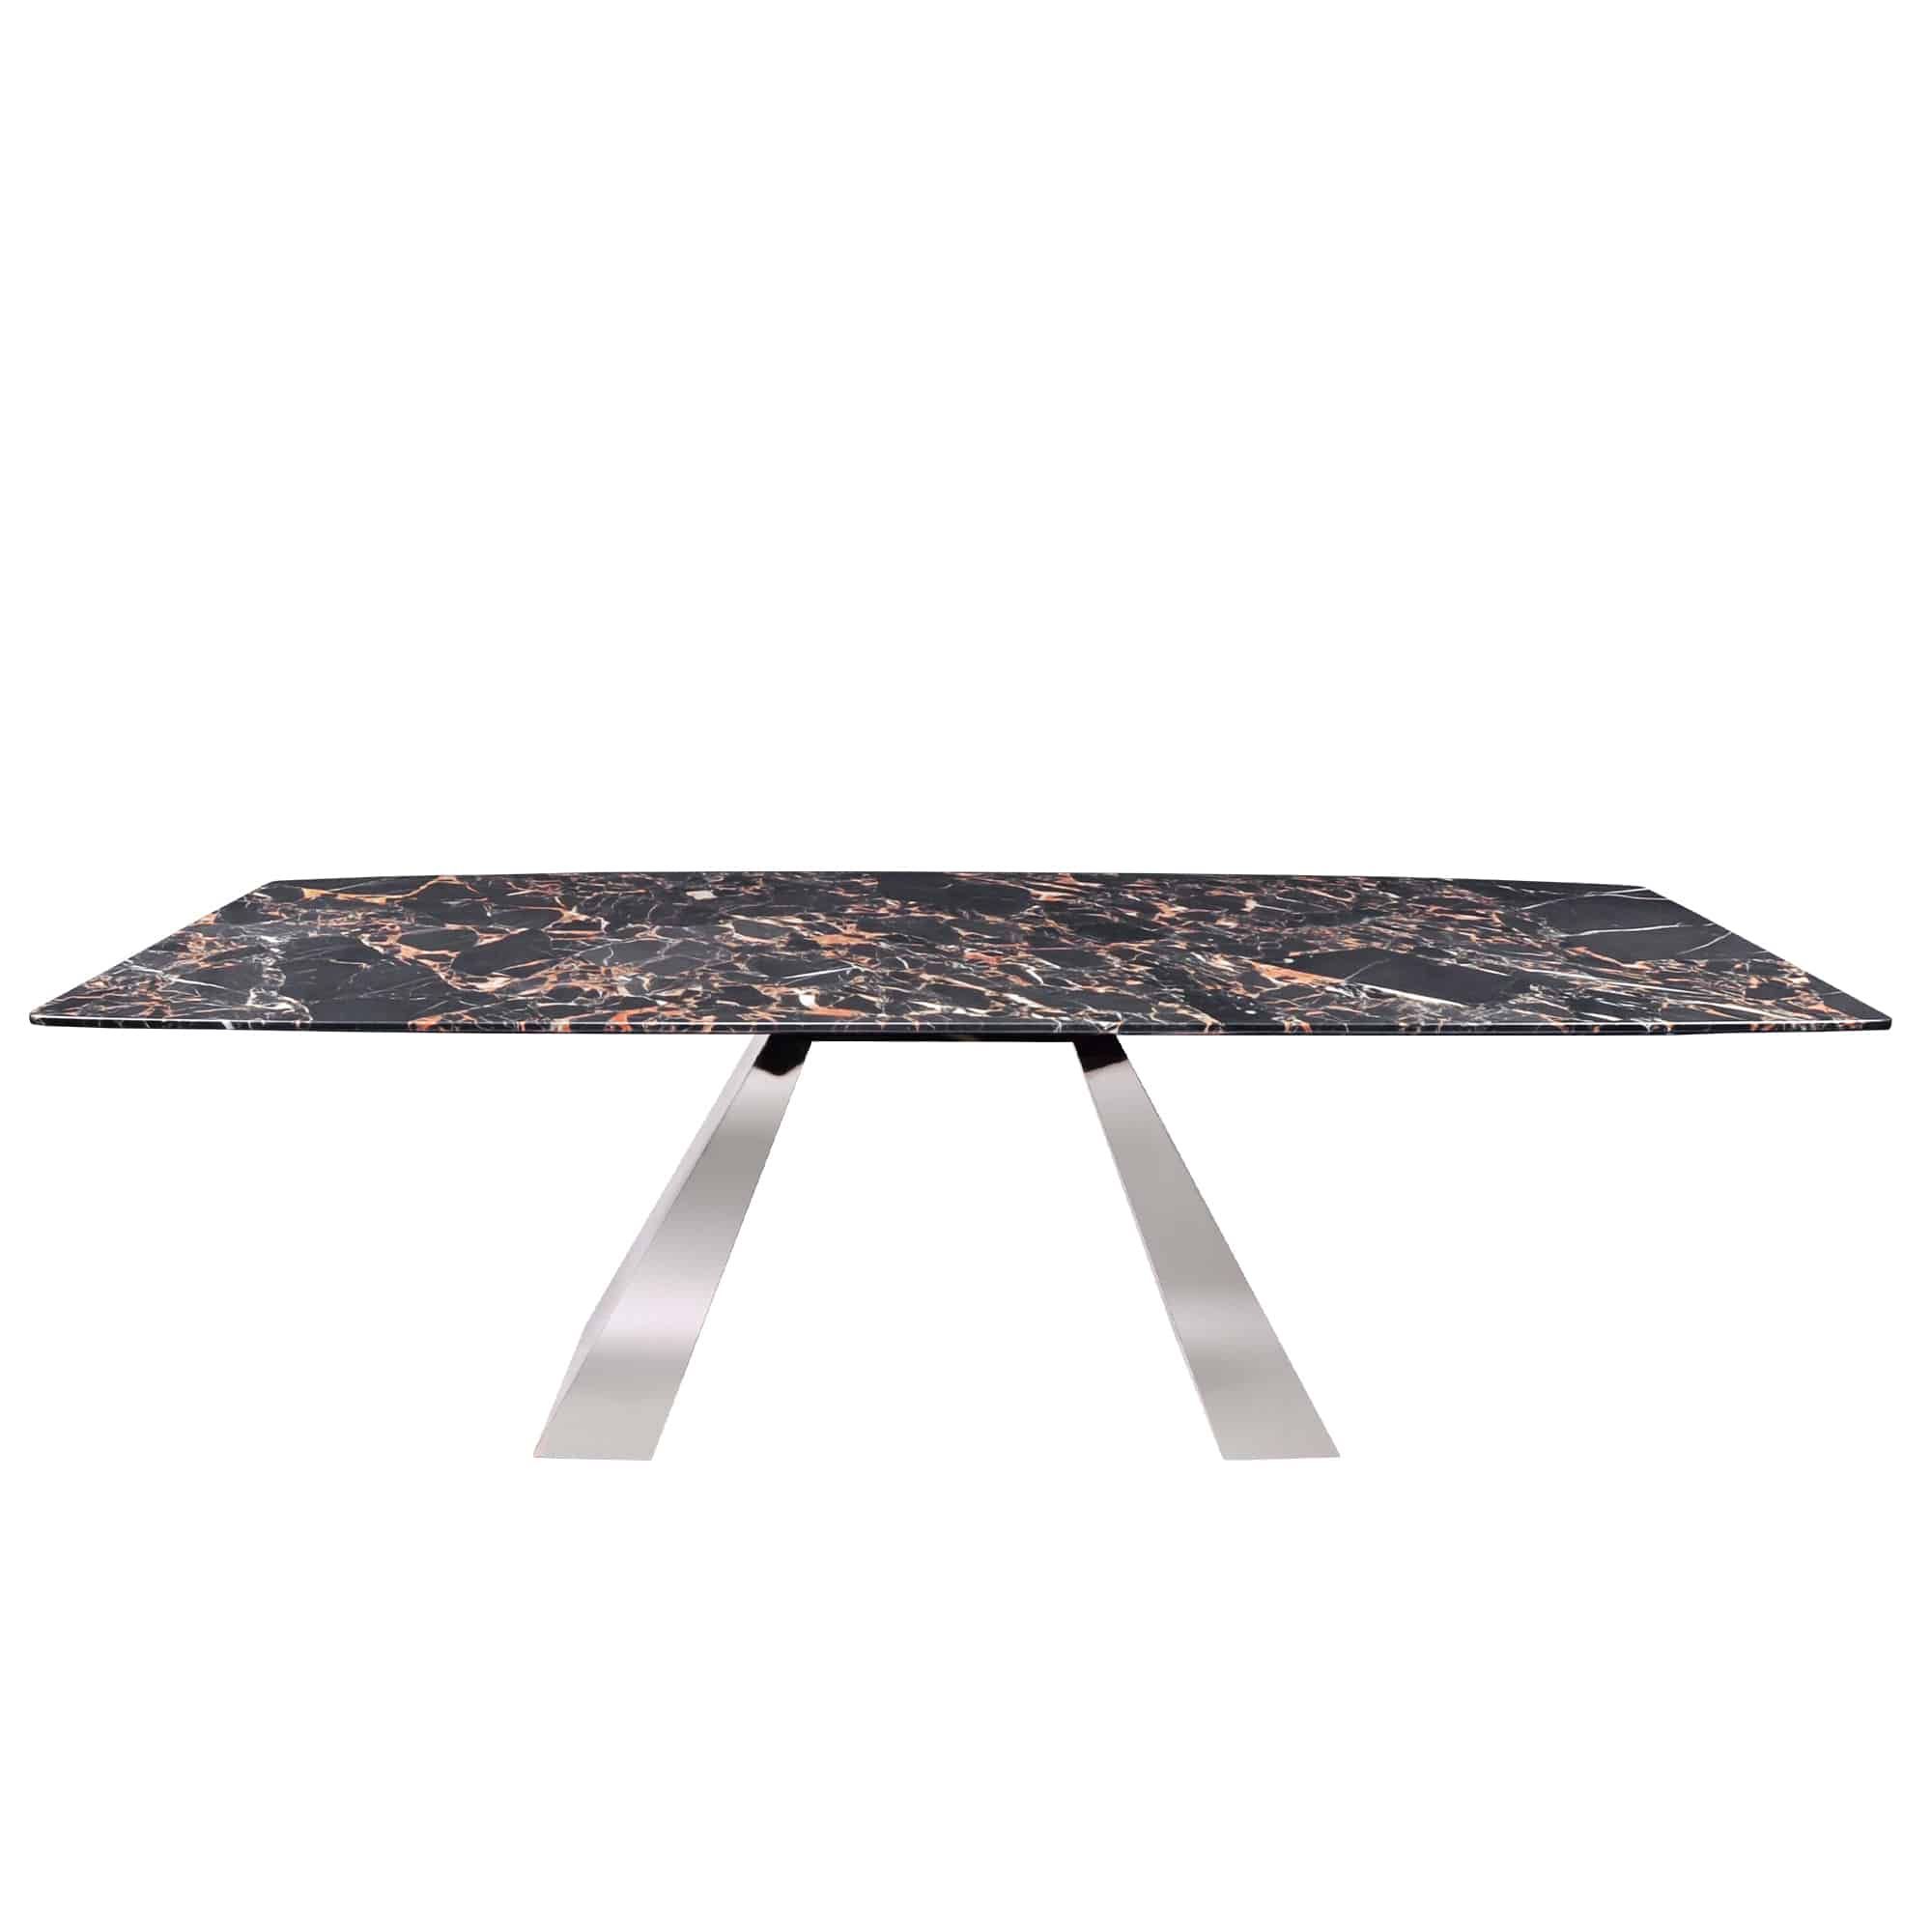 Decasa Rectangular Marble Dining Table Portoro Gold Inside Square Black And Brushed Gold Console Tables (View 13 of 20)